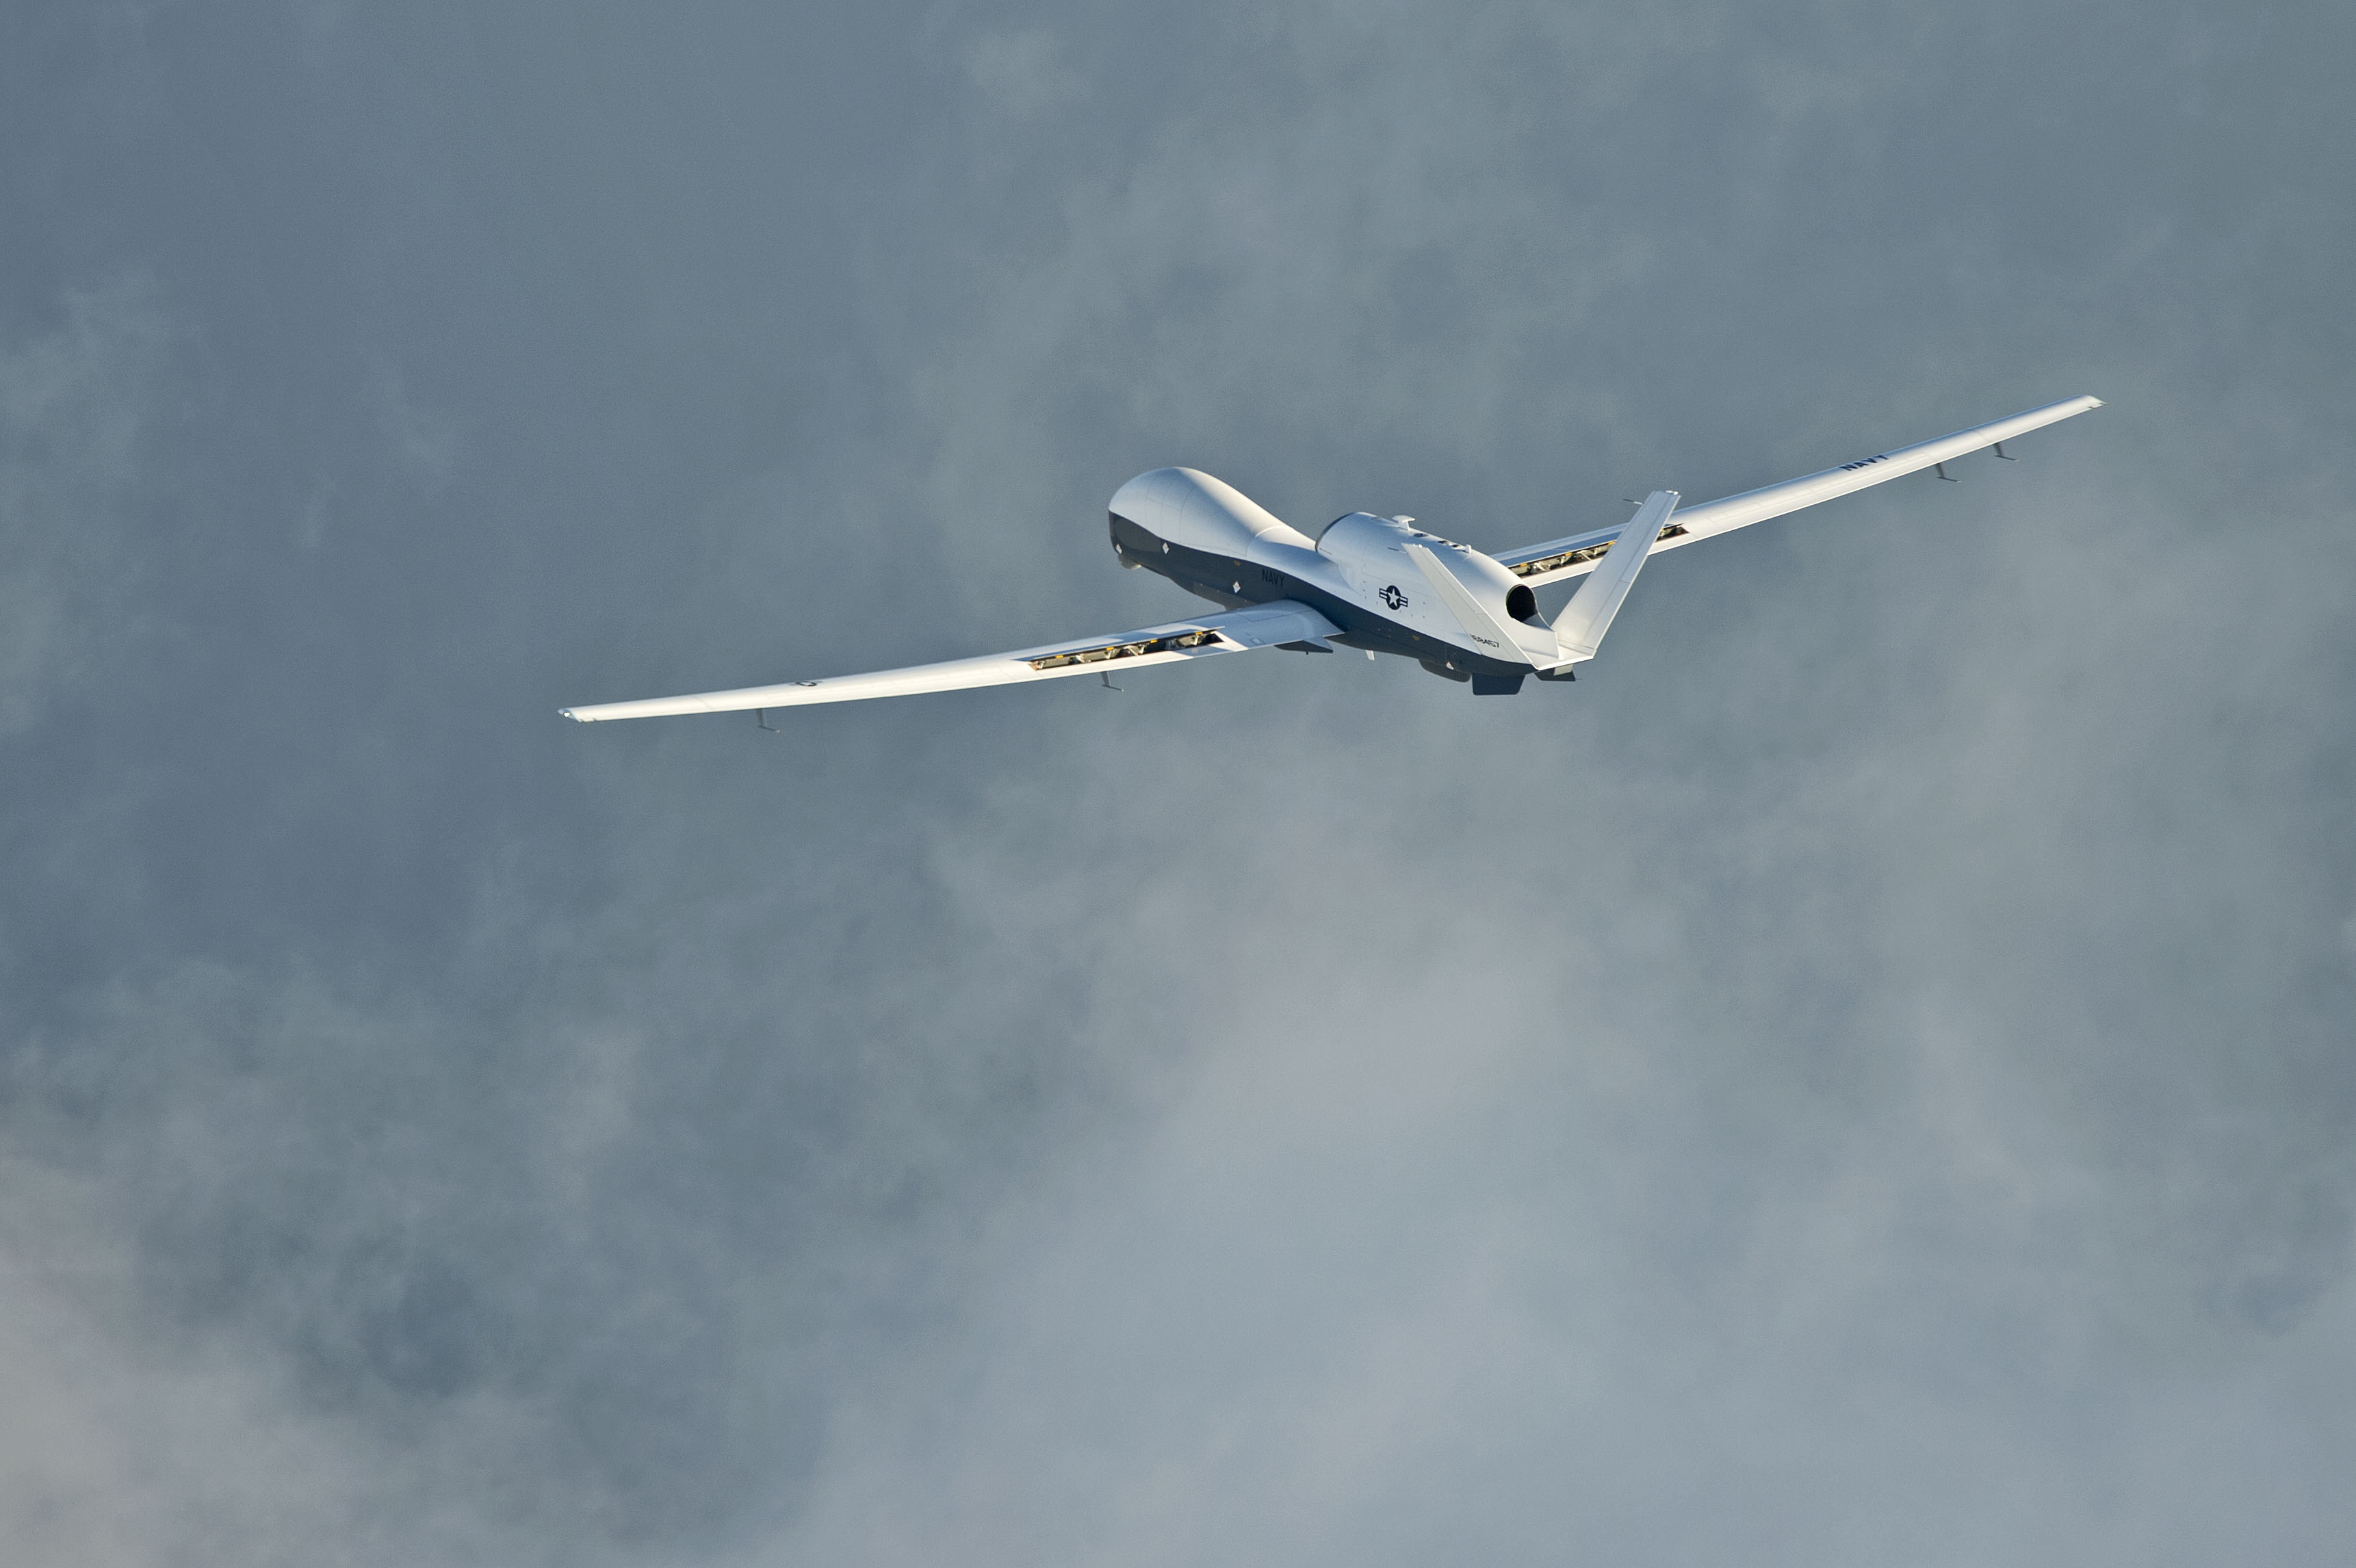 The MQ-4C Triton unmanned aircraft system completes its inaugural cross-country ferry flight at Naval Air Station Patuxent River, Md. Triton took off from the Northrop Grumman Palmdale, Calif. facility Sept. 17, 2014. US Navy photo.